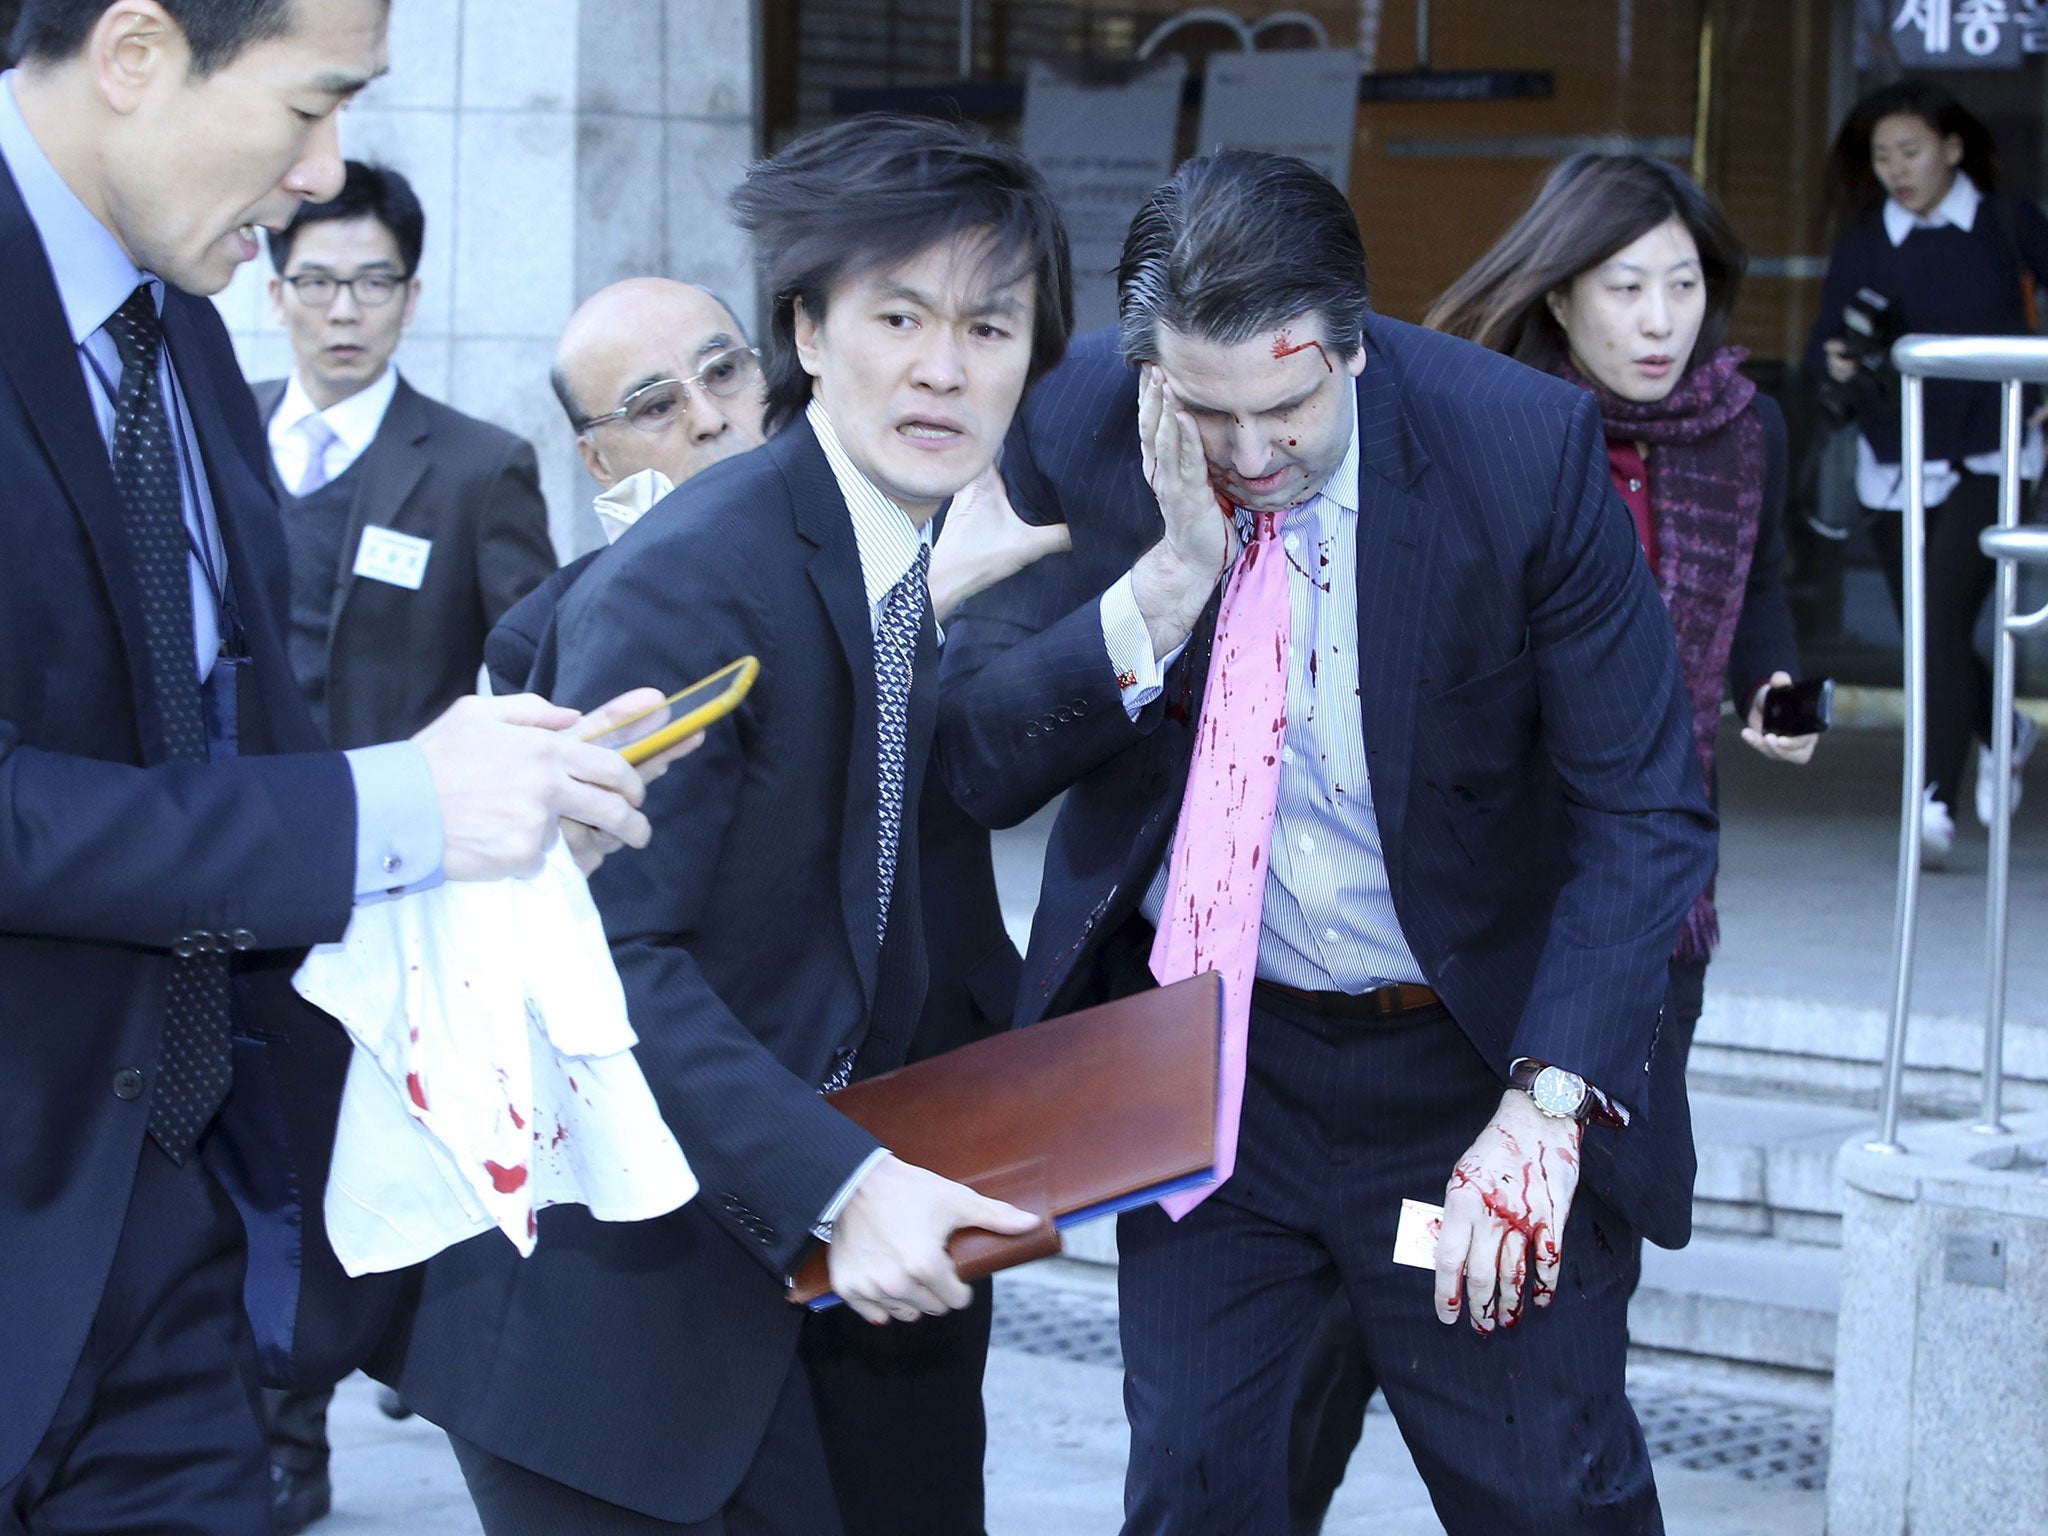 The US ambassador to South Korea Mark Lippert (R) leaves a meeting after he was slashed in the face by a knife-wielding assailant (Reuters)